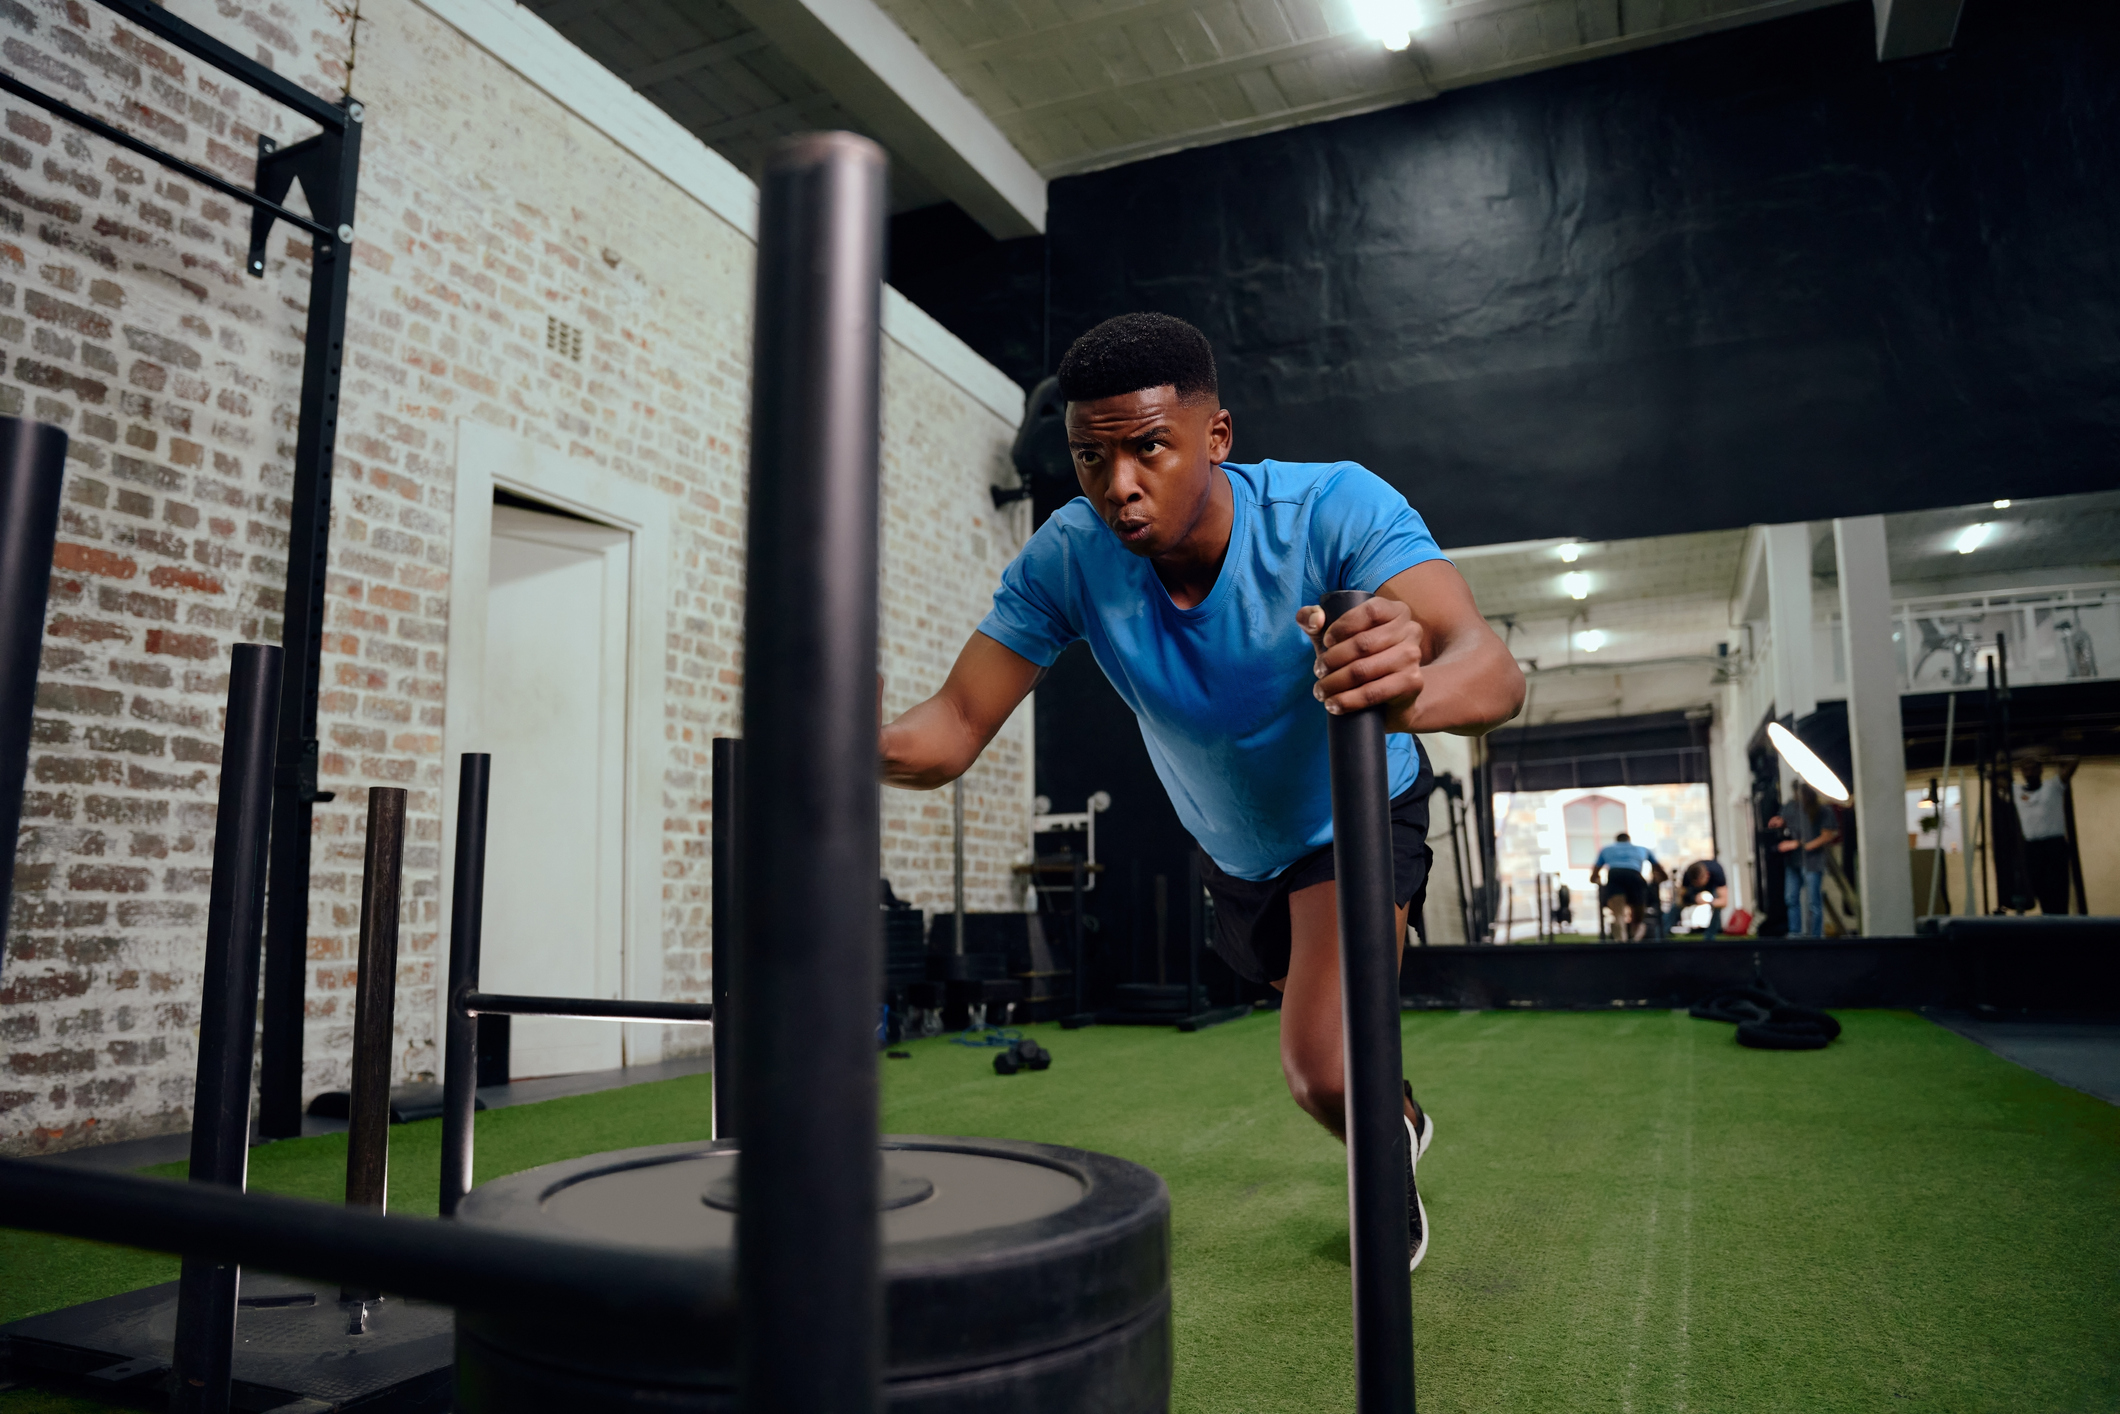 A young black man does a sled press exercise in a gym.